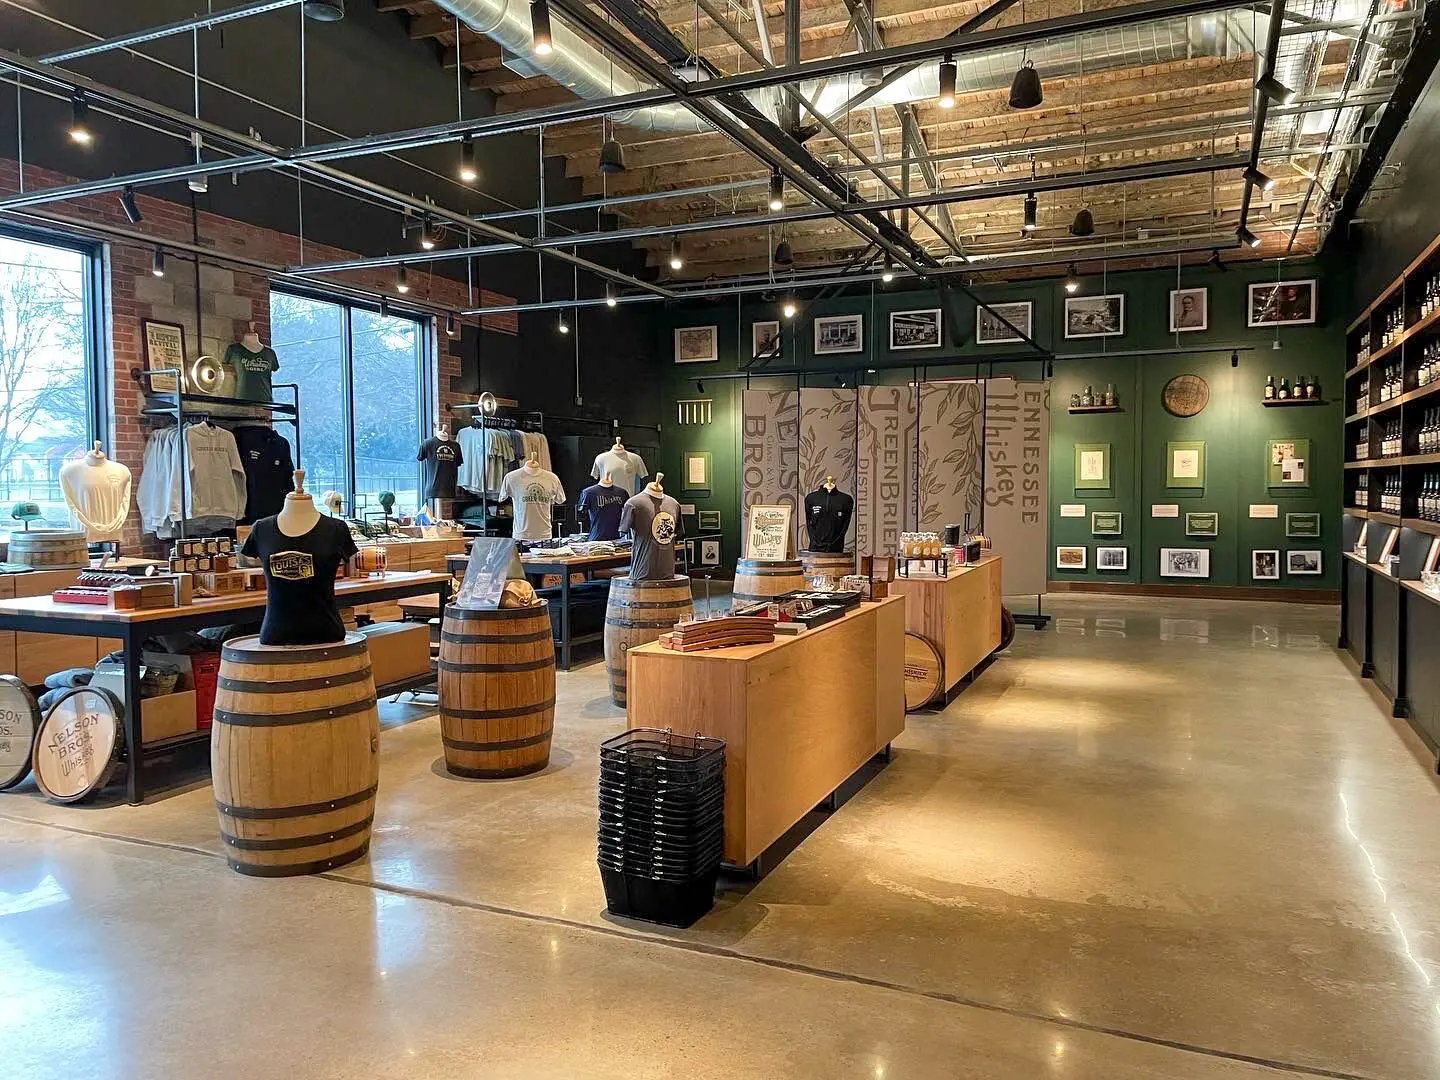 A Store With Wooden Barrels and Winery Decor